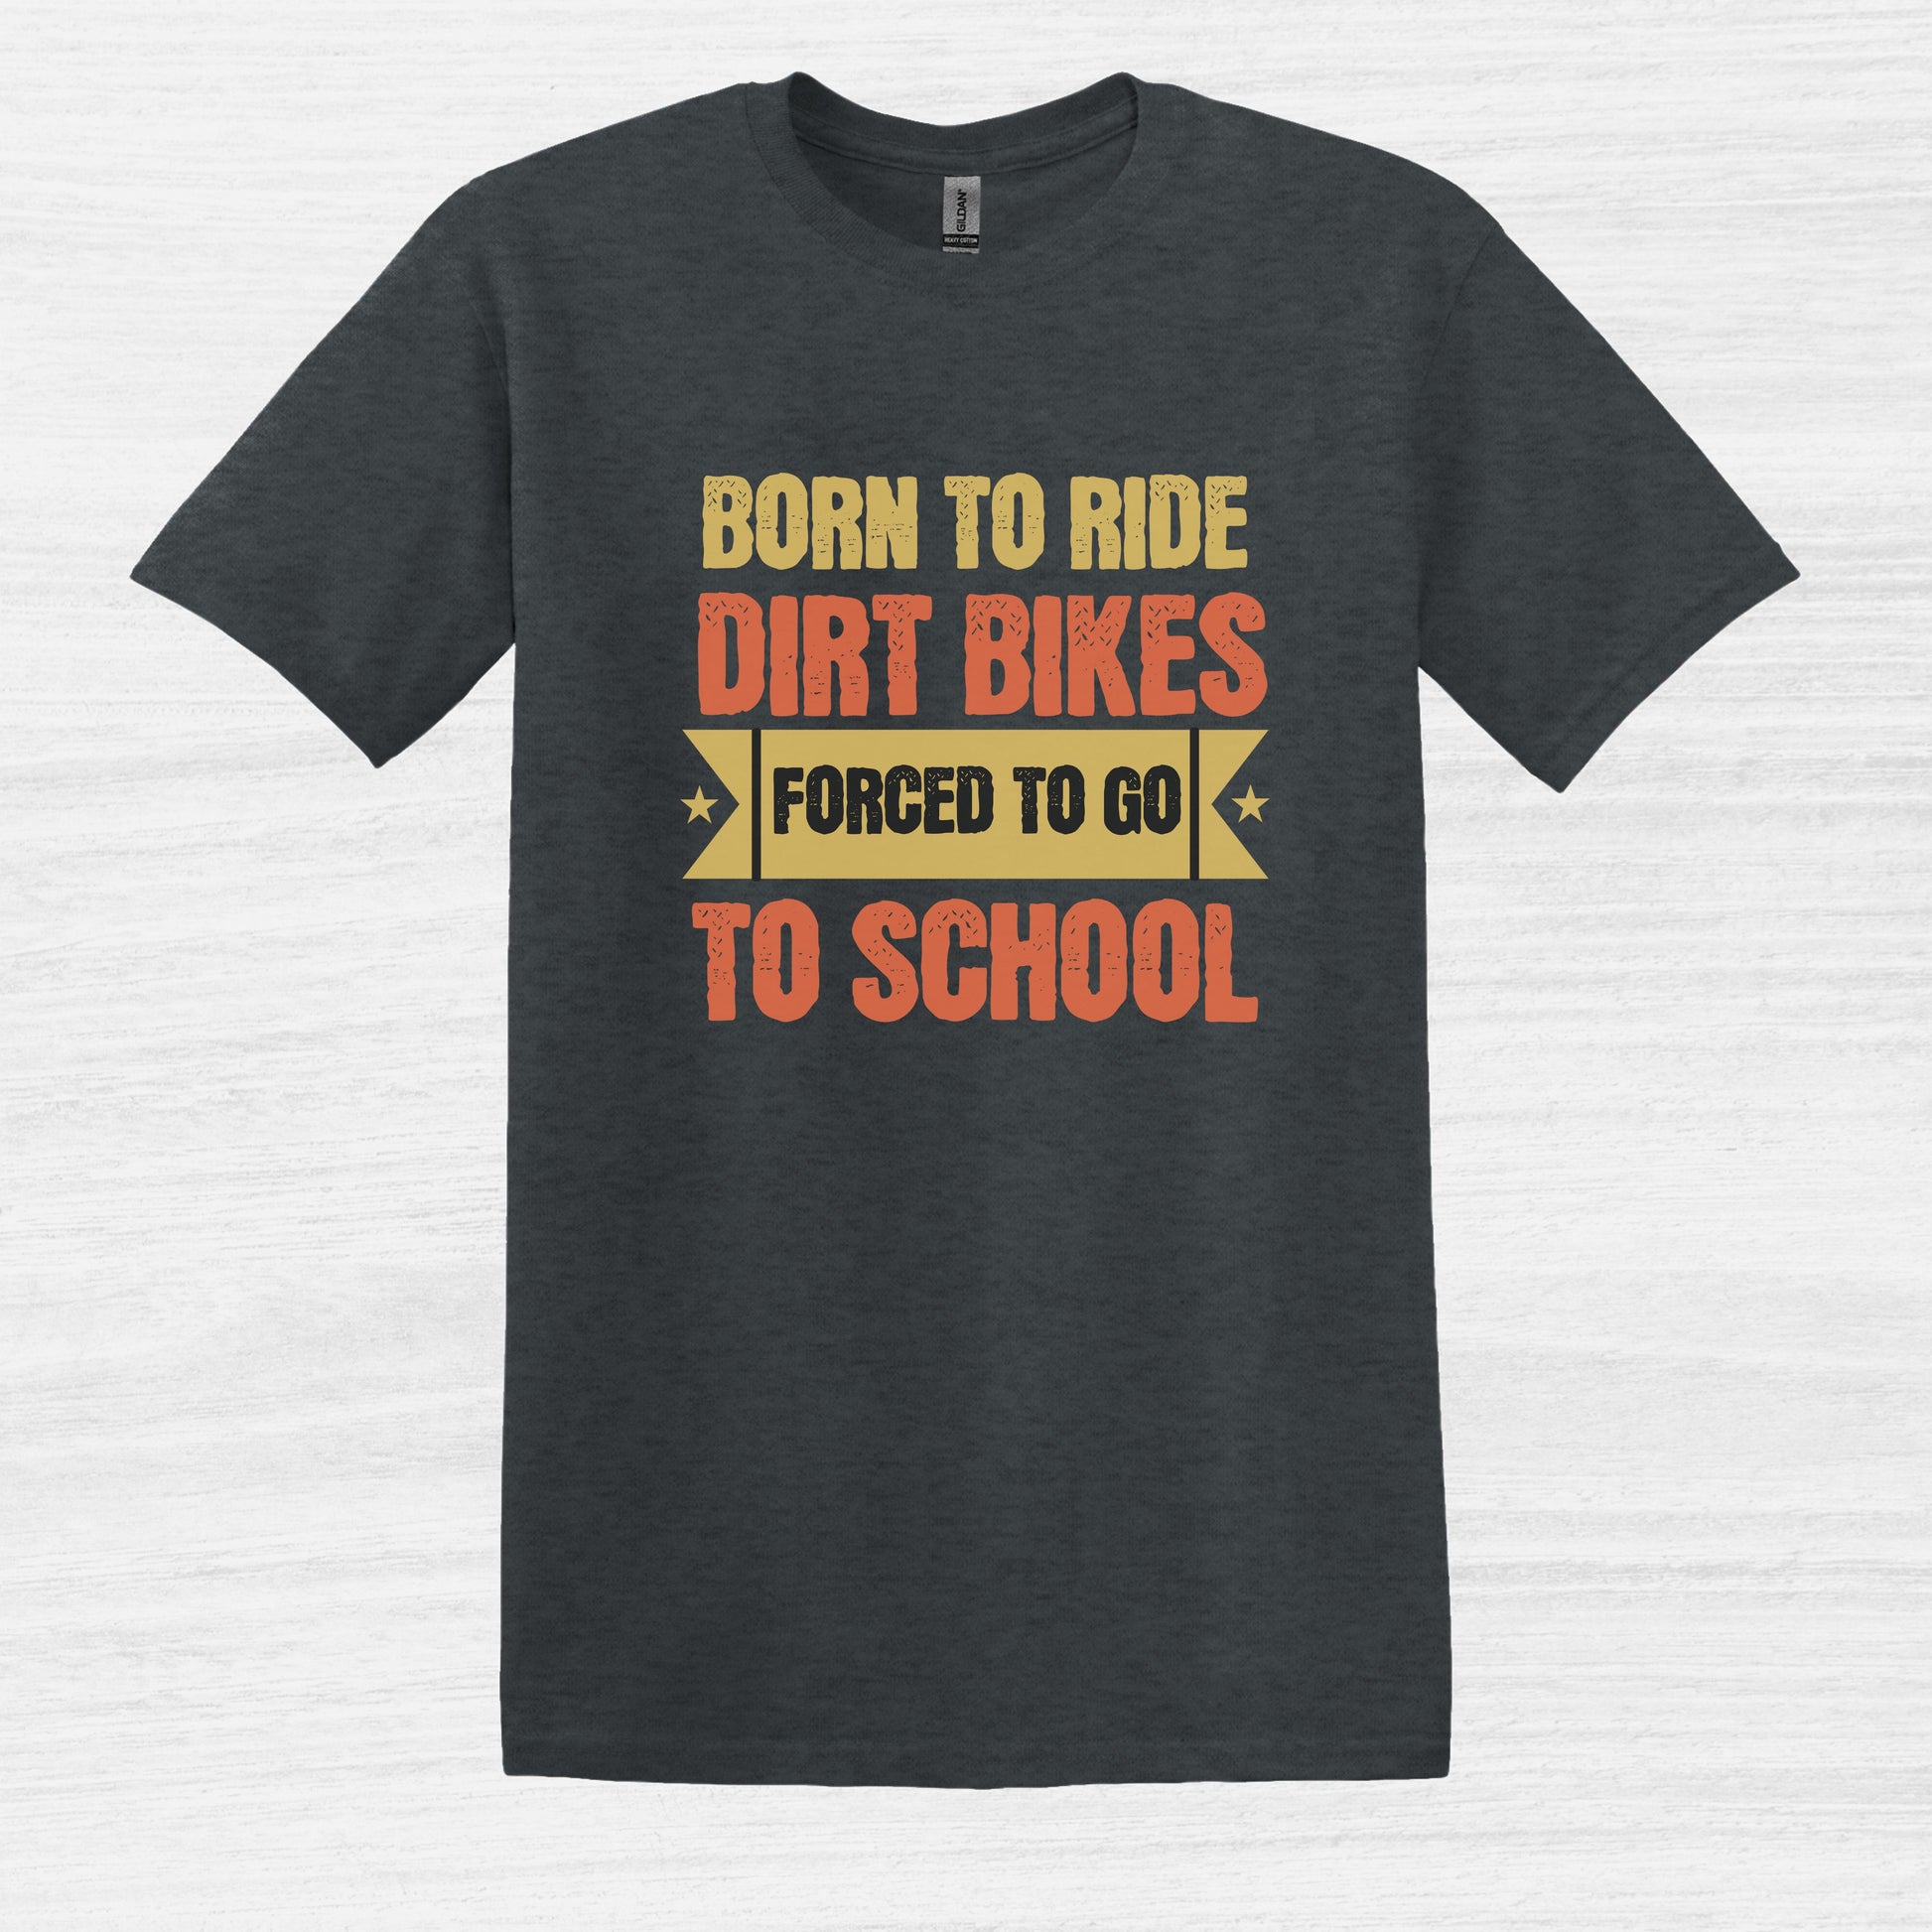 Bike Bliss Born to Ride Dirt Bikes Forced to go to School T-shirt for Men Dark Heather 2